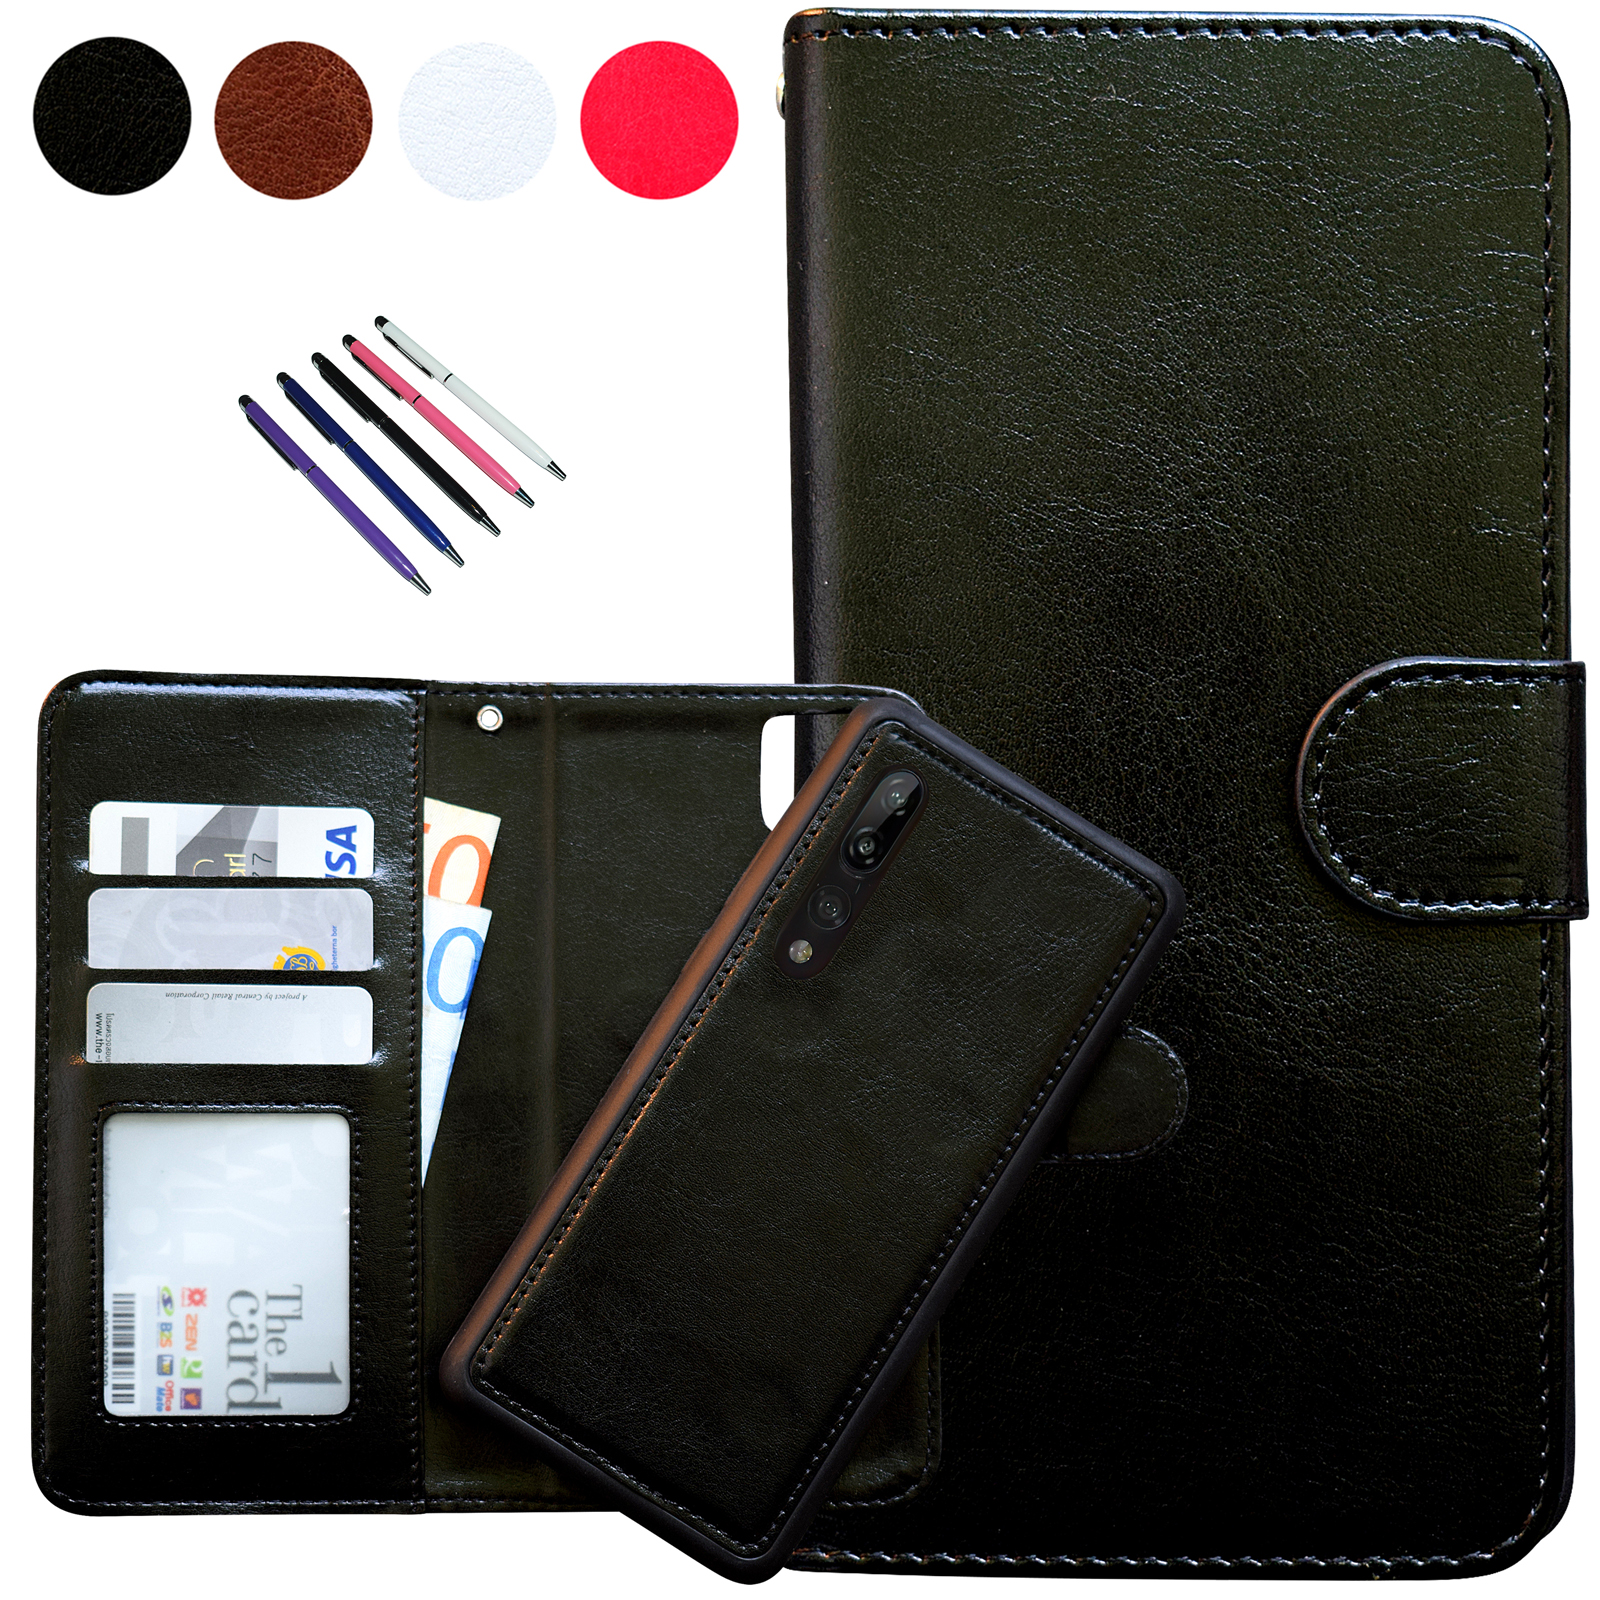 Huawei P20 Pro - Leather Case / Wallet